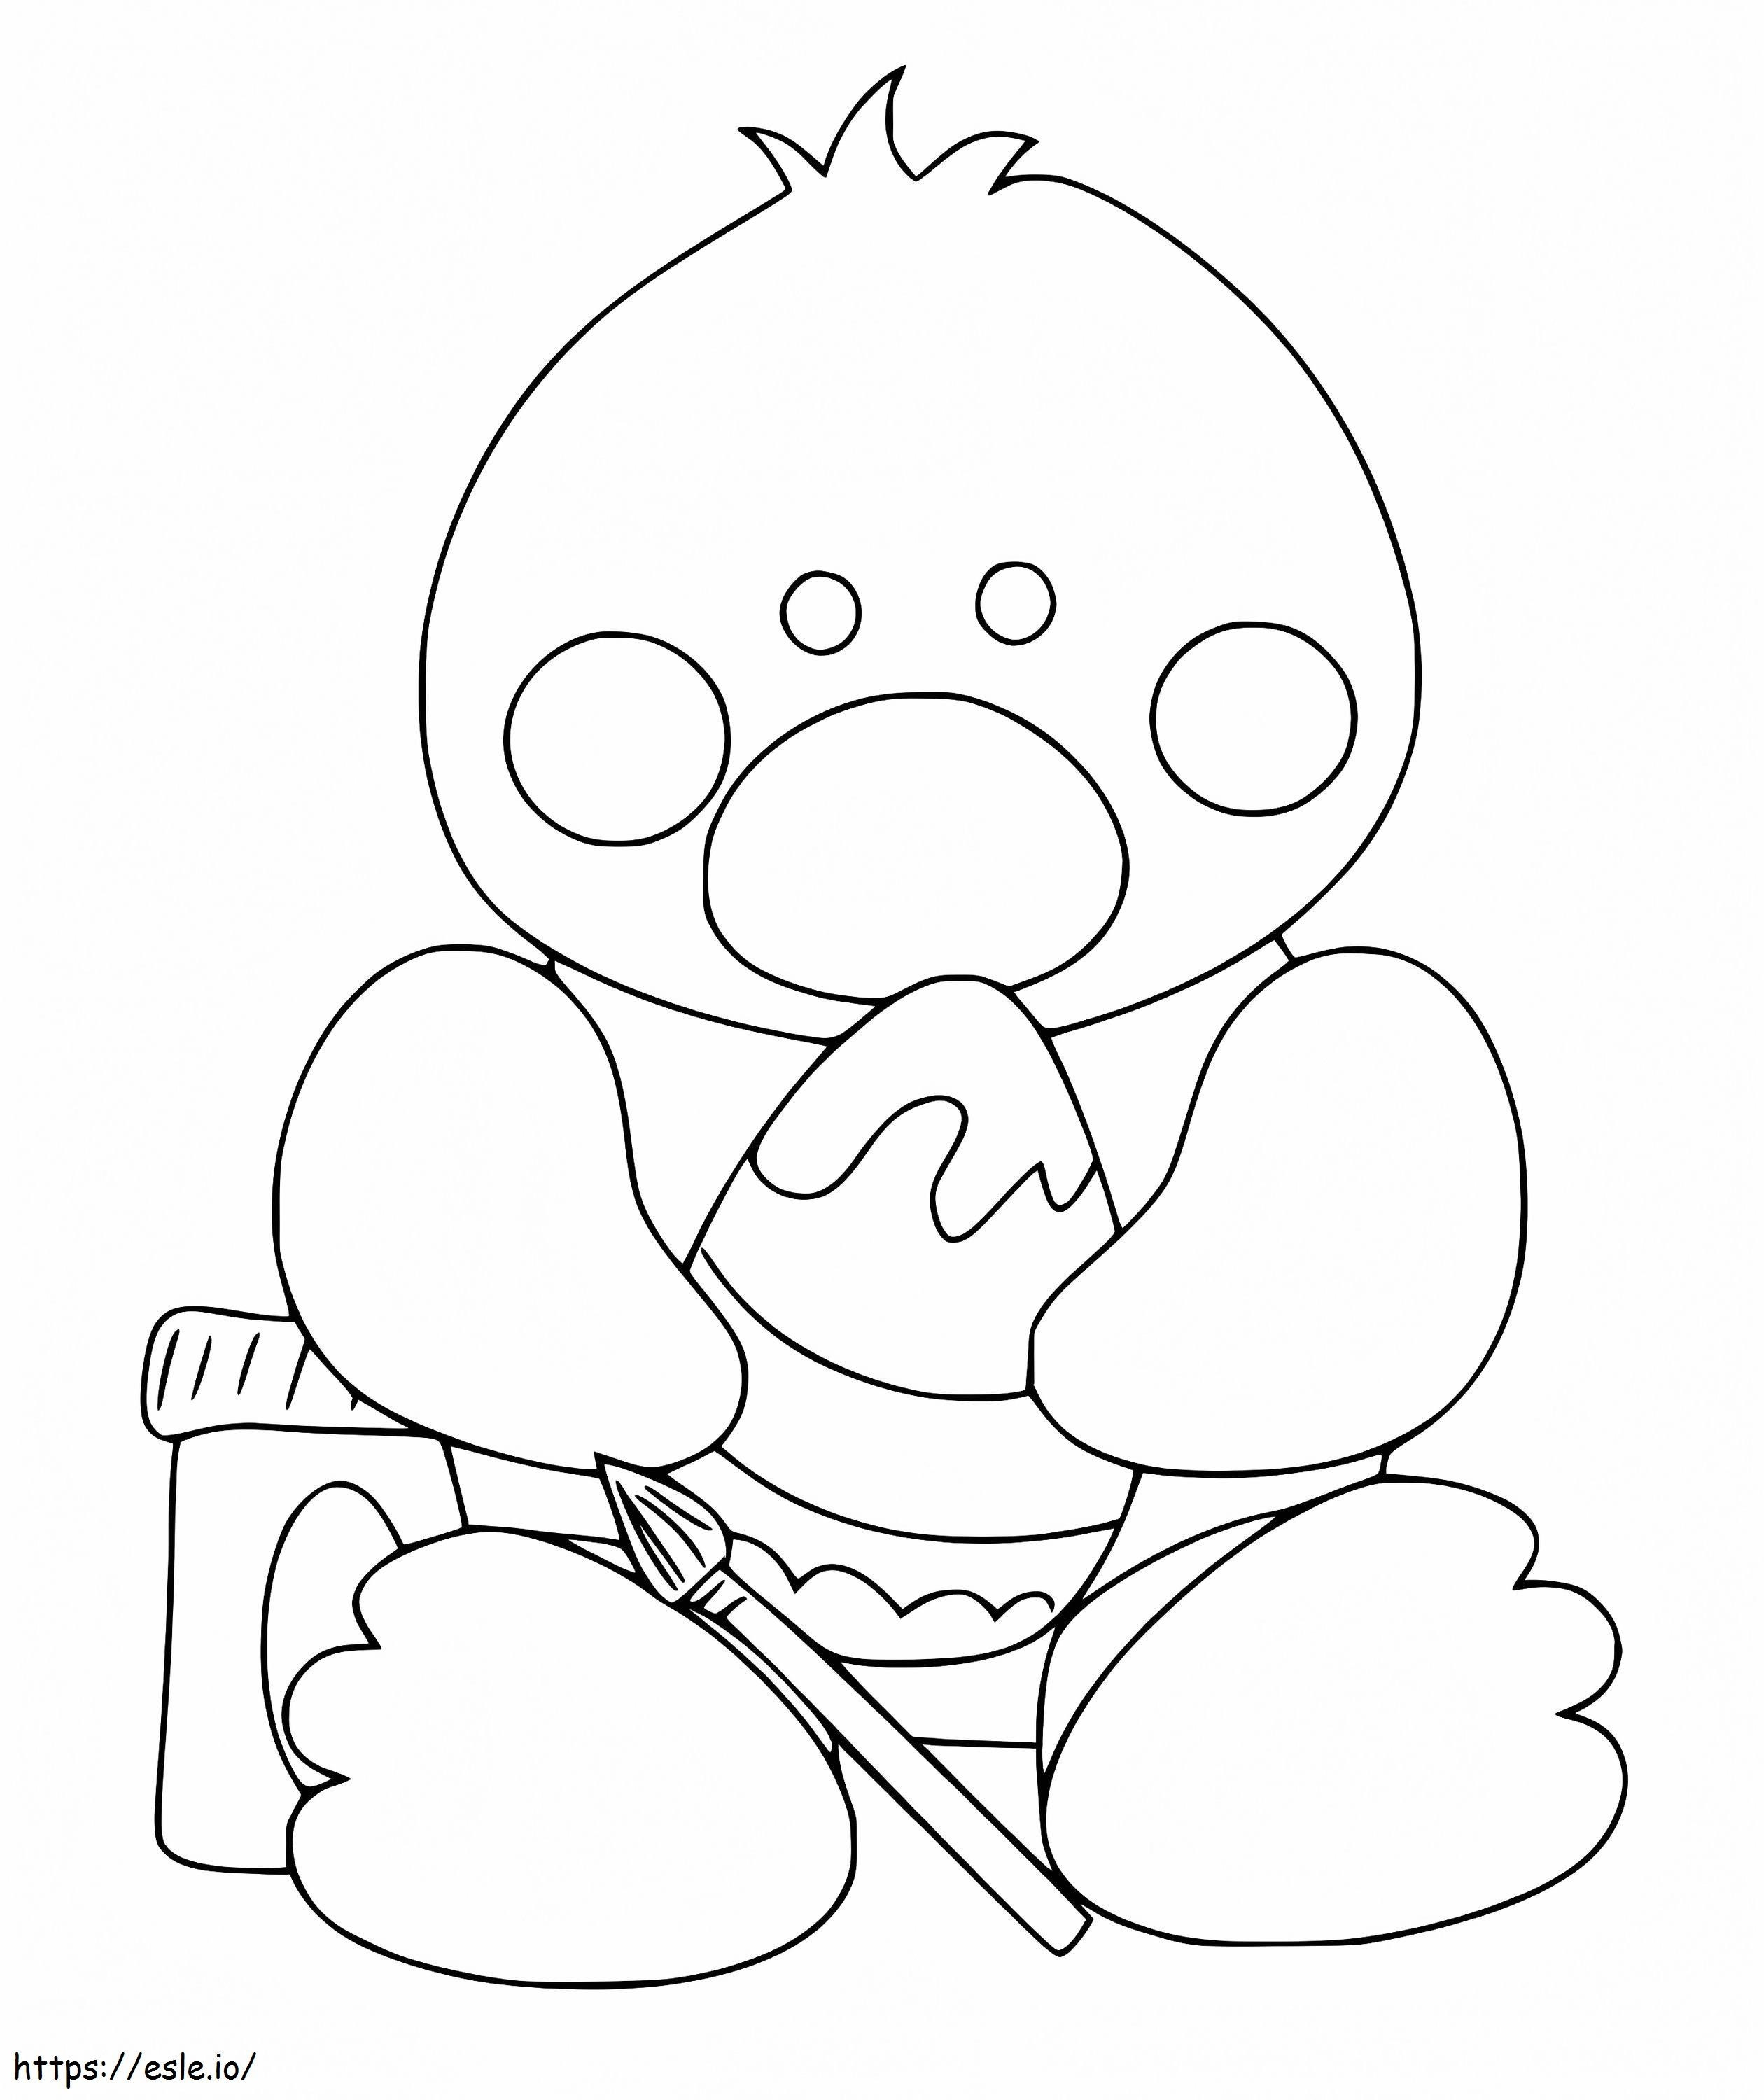 Simple Easter Chick coloring page